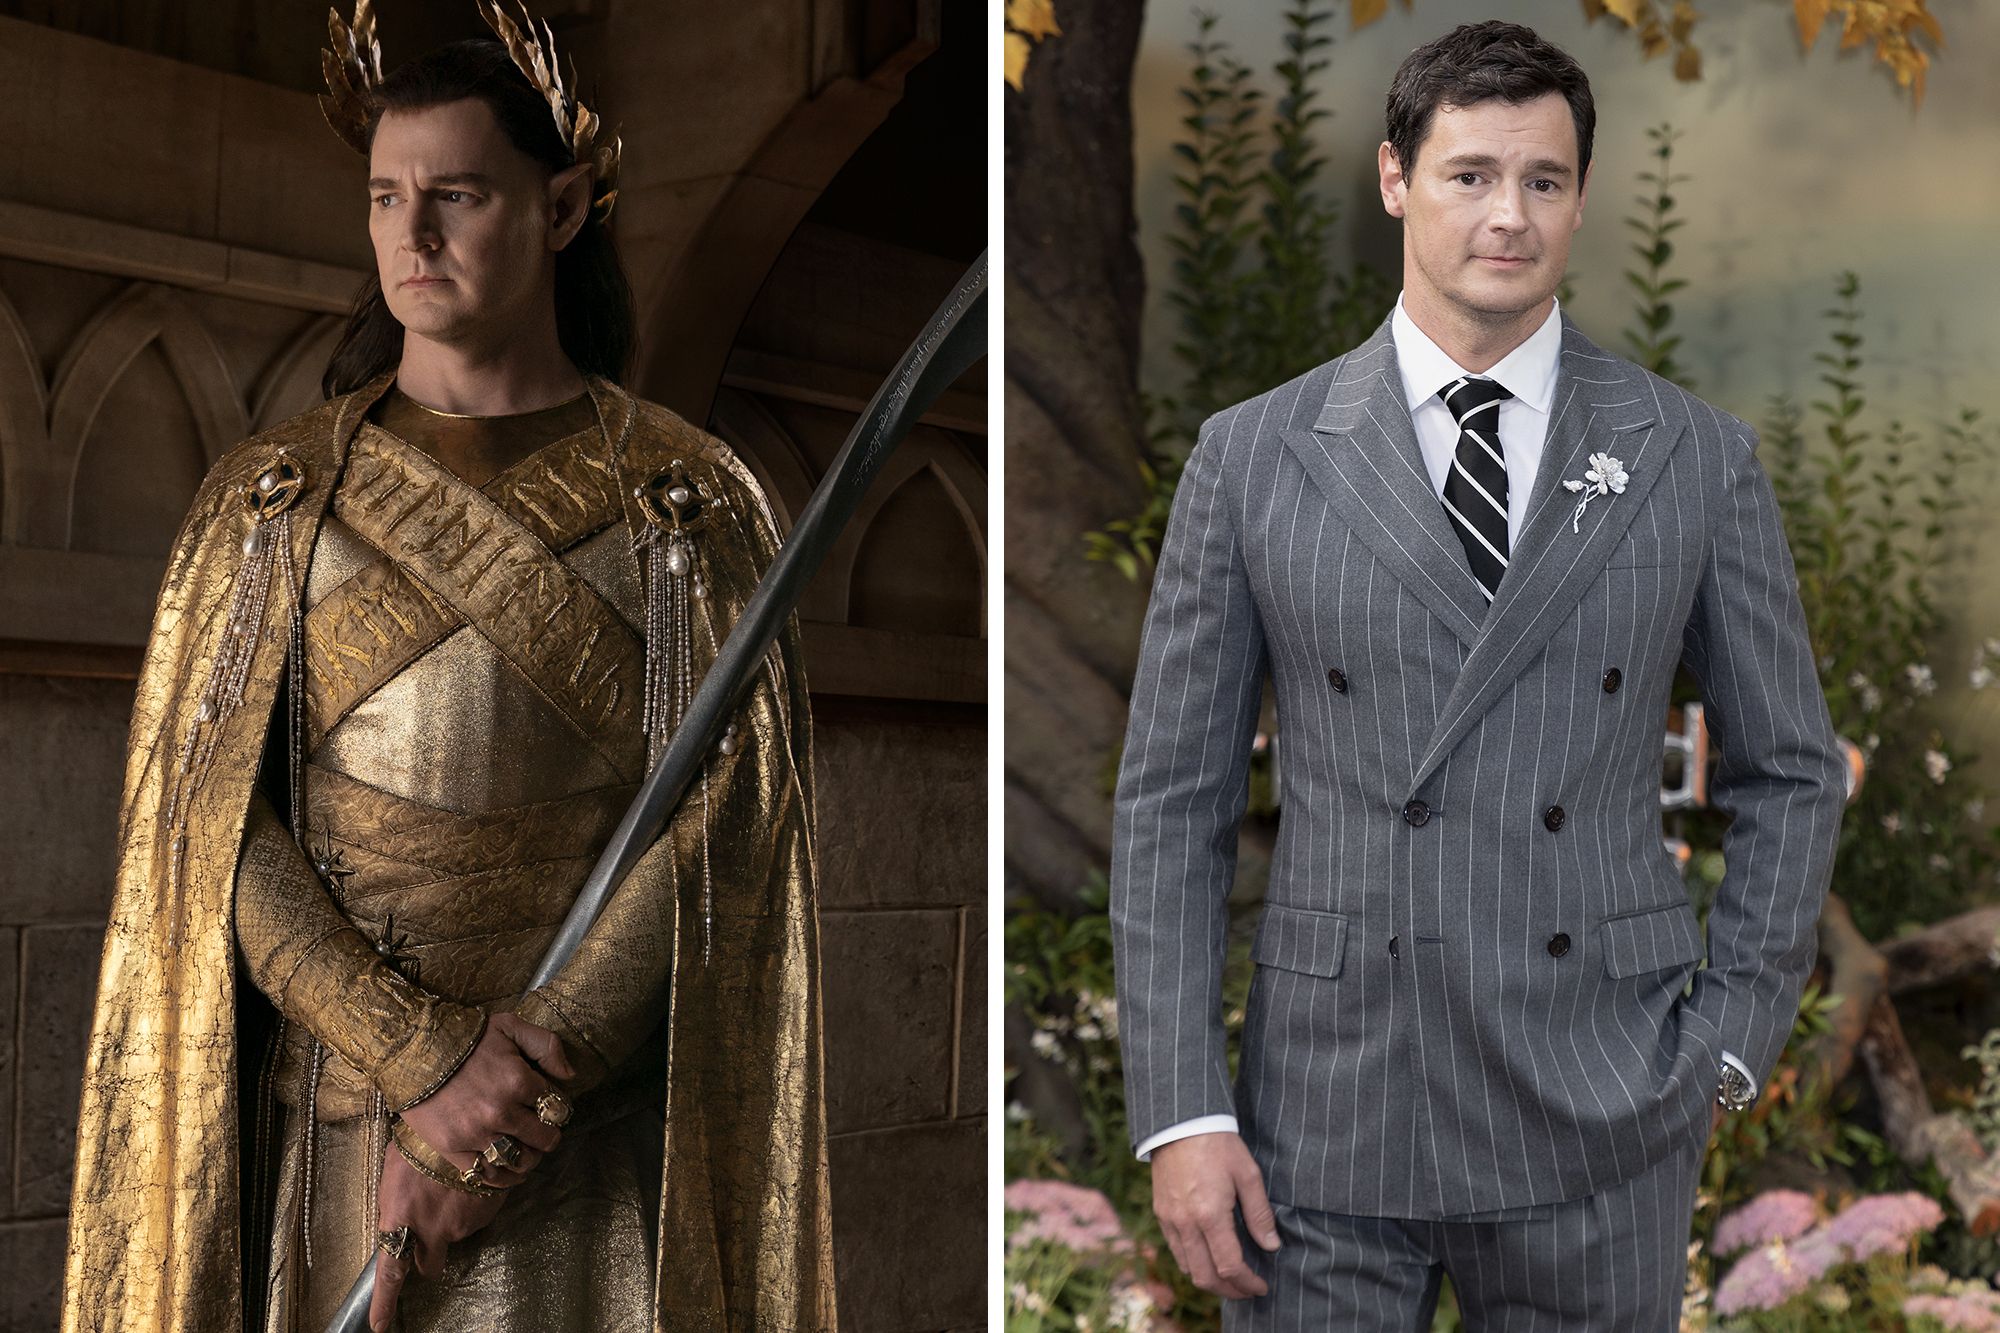 What the 'Rings of Power' Cast Looks Like in Real Life - 'Lord of the Rings'  Prequel Actors IRL